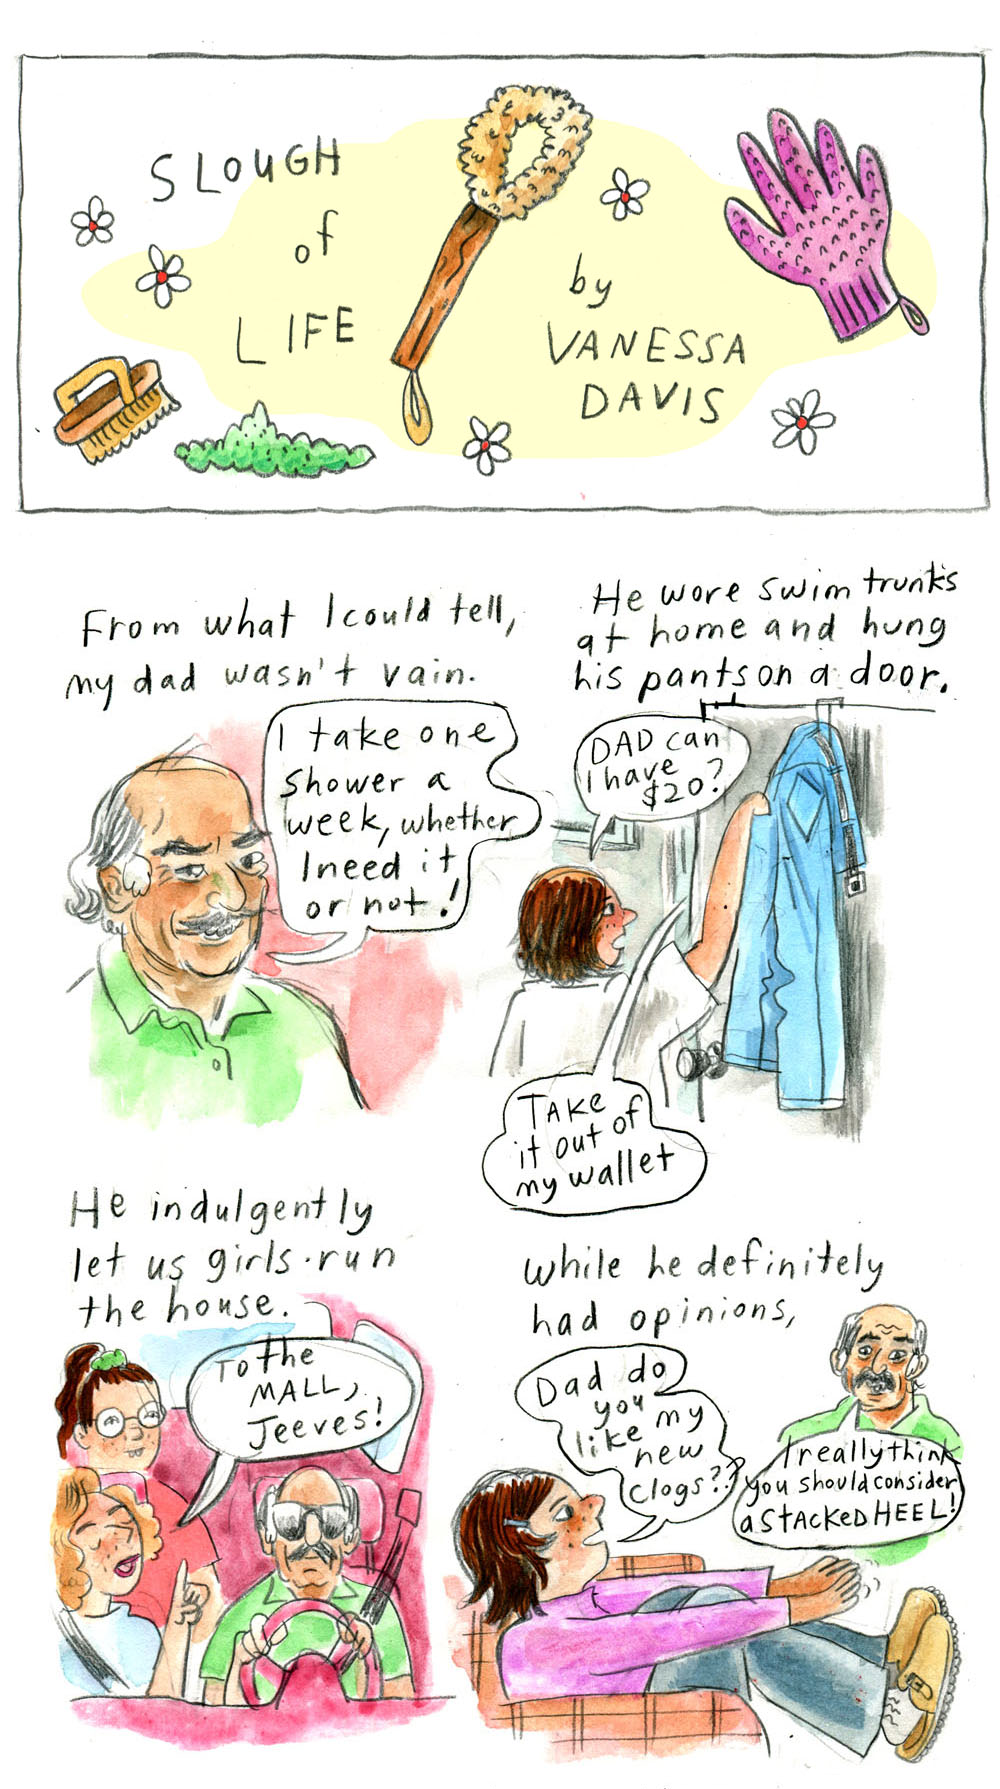 "Slough of Life by Vanessa Davis" - title panel illustrated with little daisies, a vegetable scrub brush, a dishwashing scrub wand, a pink dishwashing glove, and a patch of green. 1. "From what I could tell, my dad wasn't vain." Vanessa's dad has gray hair that's longer on the sides and bald on top. He has bushy eyebrows and a mustache, with high, prominent cheekbones. He is wearing a green, collared shirt. He looks at the viewer cheekily and says, "I take one shower a week, whether I need it or not!" 2. "He wore swim trunks at home and hung his pants on a door." Vanessa as a girl, with a shoulder-length bob, wears an oversized t-shirt. She is reaching into the pants pocket of a pair of blue jeans hanging on a door. She says, "Dad can I have $20?" From off-panel, her dad replies, "Take it out of my wallet" 3. "He indulgently let us girls run the house." Vanessa's dad wears large, dark sunglasses and chauffeurs a woman and girl. He looks straight ahead as the woman in the passenger seat jokingly orders, "To the mall, Jeeves!" 4. "While he definitely had options," Young Vanessa wears a pink turtleneck, blue jeans, and a pair of beige clogs. She sits back in a chair holding her feet out and asks, "Dad do you like my new clogs??" Her dad, in the same green shirt, replies, "I really think you should consider a stacked heel"